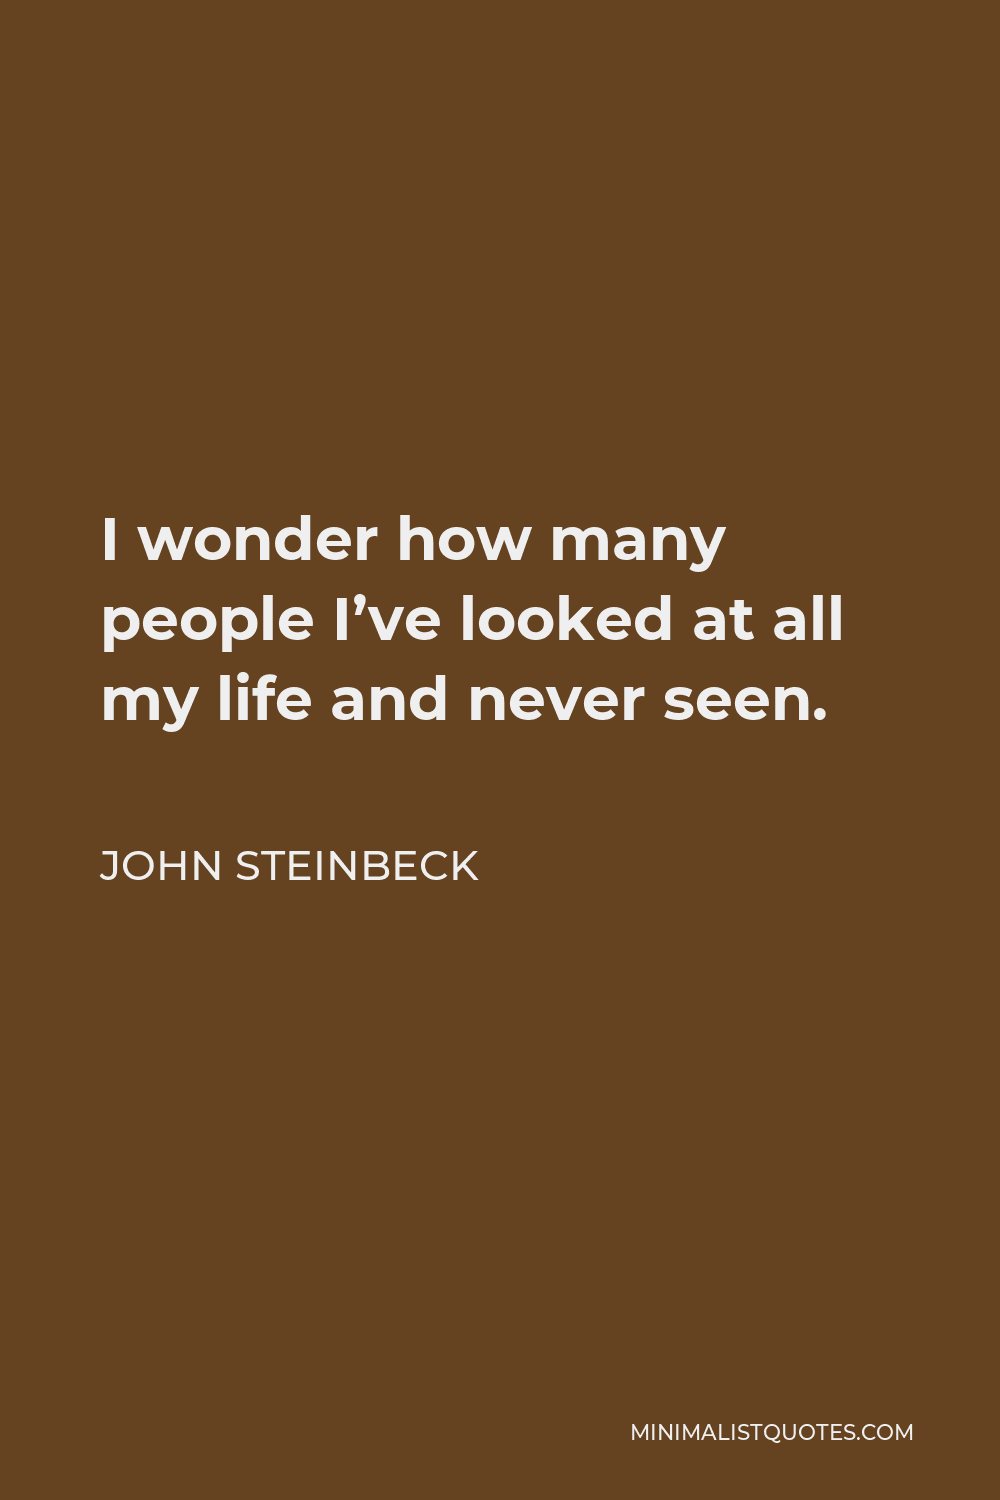 John Steinbeck Quote - I wonder how many people I’ve looked at all my life and never seen.